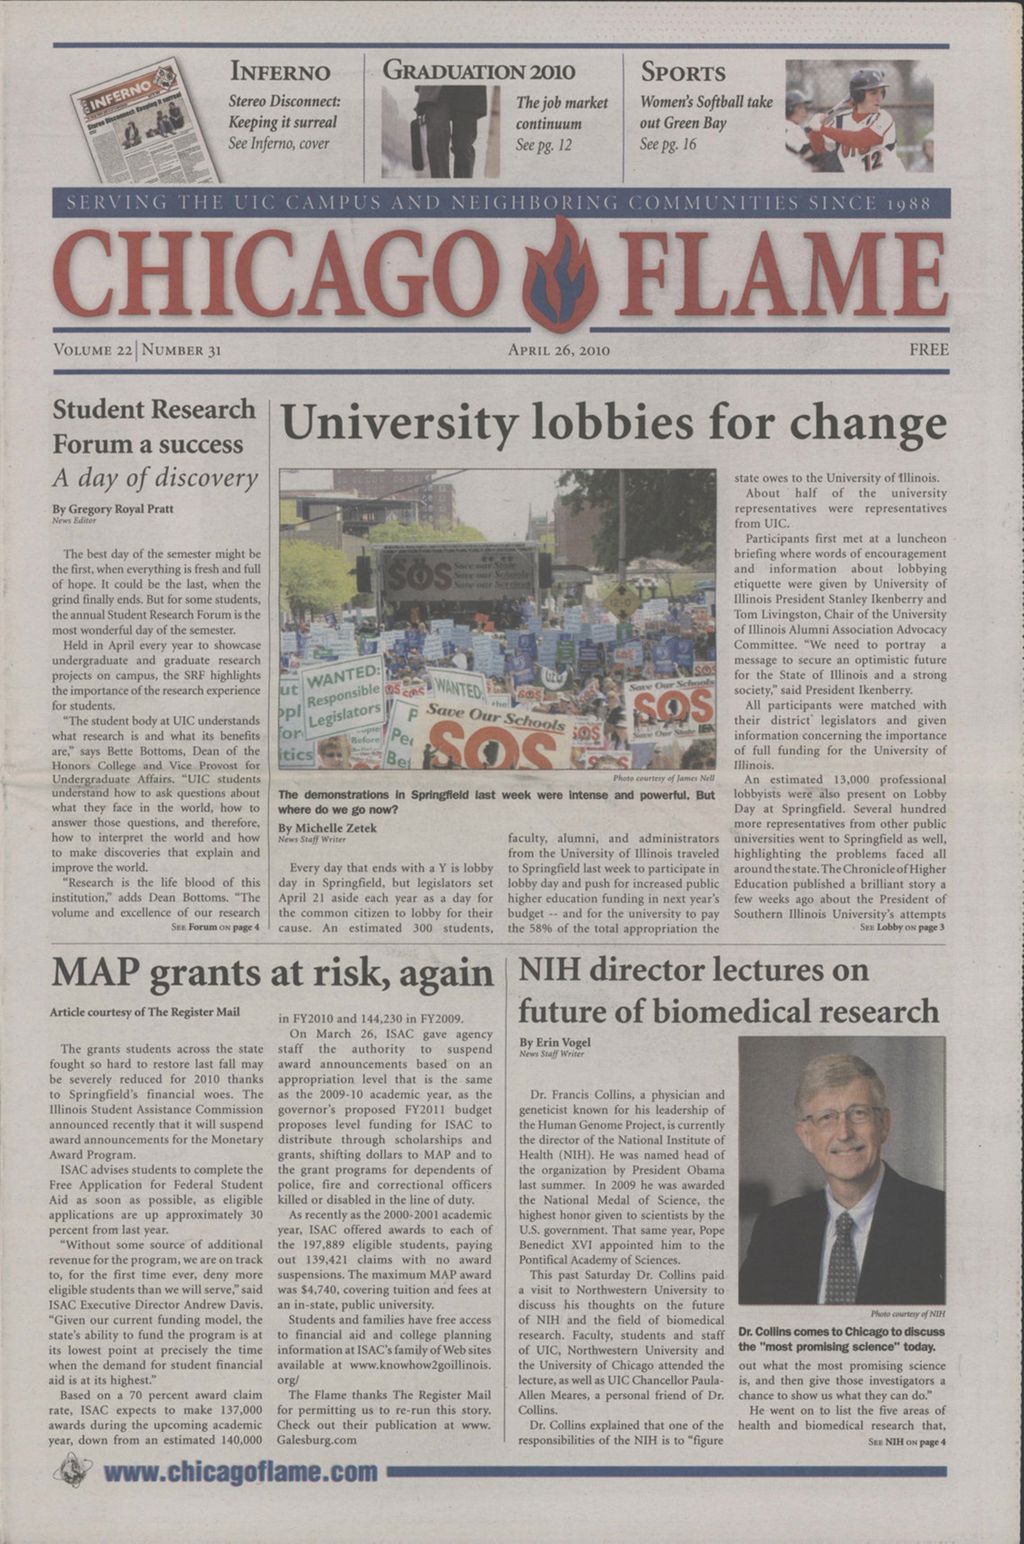 Miniature of Chicago Flame (April 26, 2010)